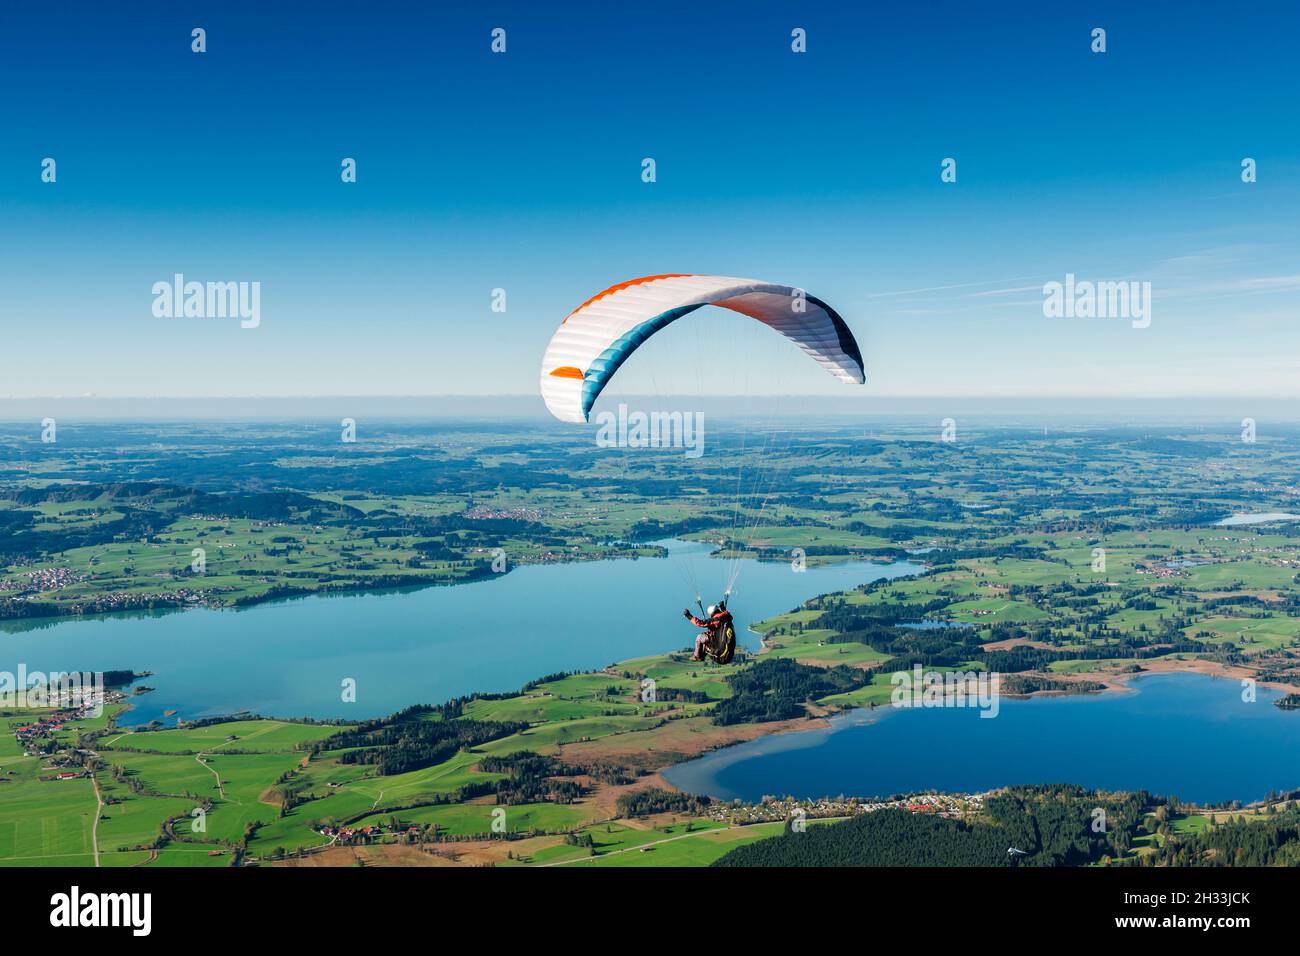 Paraglider pilots over a lake landscape in Bavaria in front of a blue sky and a wonderful panoramic view. Stock Photo